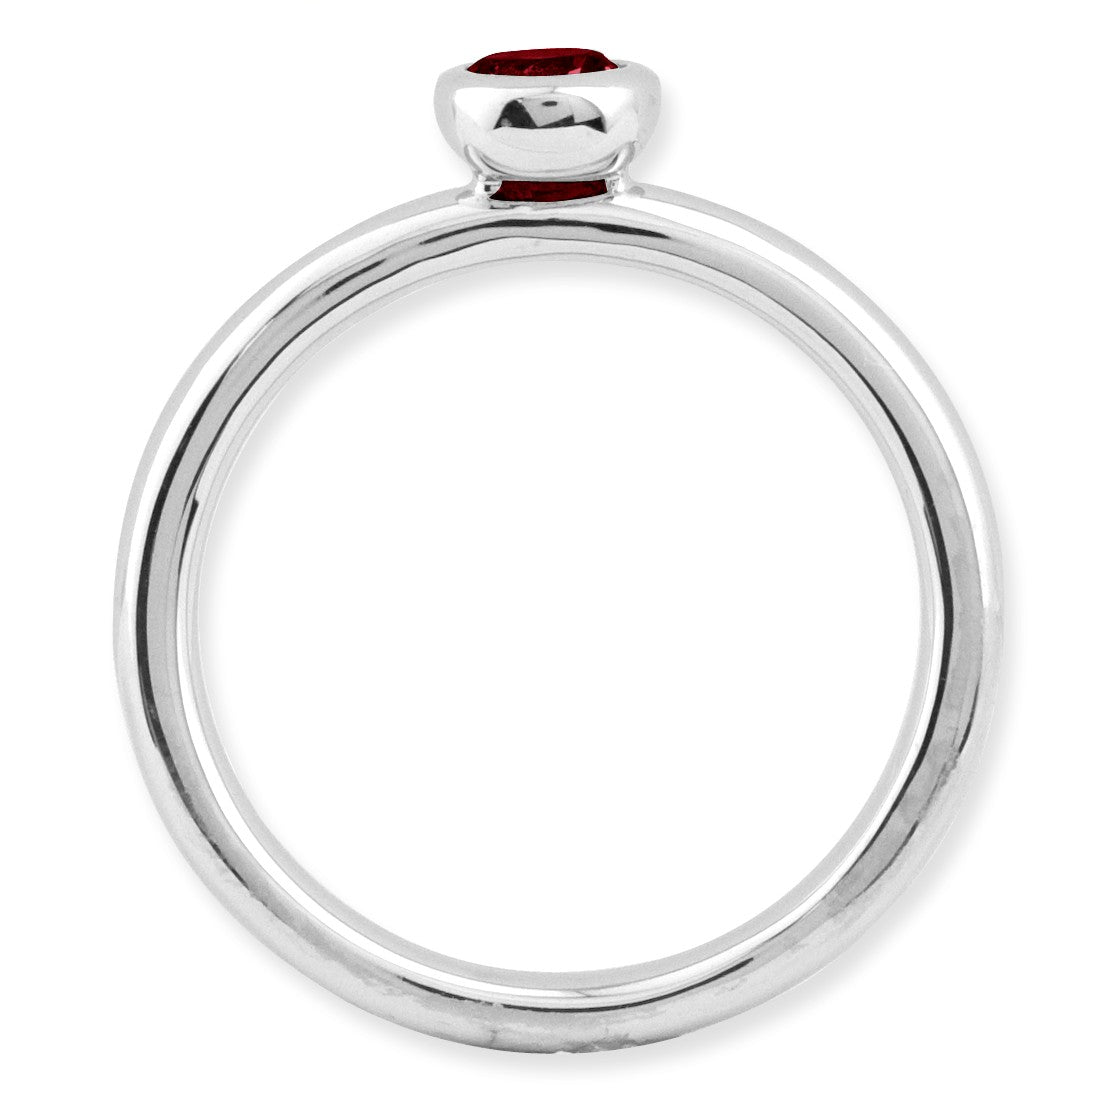 Alternate view of the Sterling Silver &amp; Garnet Stackable Low Profile 4mm Solitaire Ring by The Black Bow Jewelry Co.